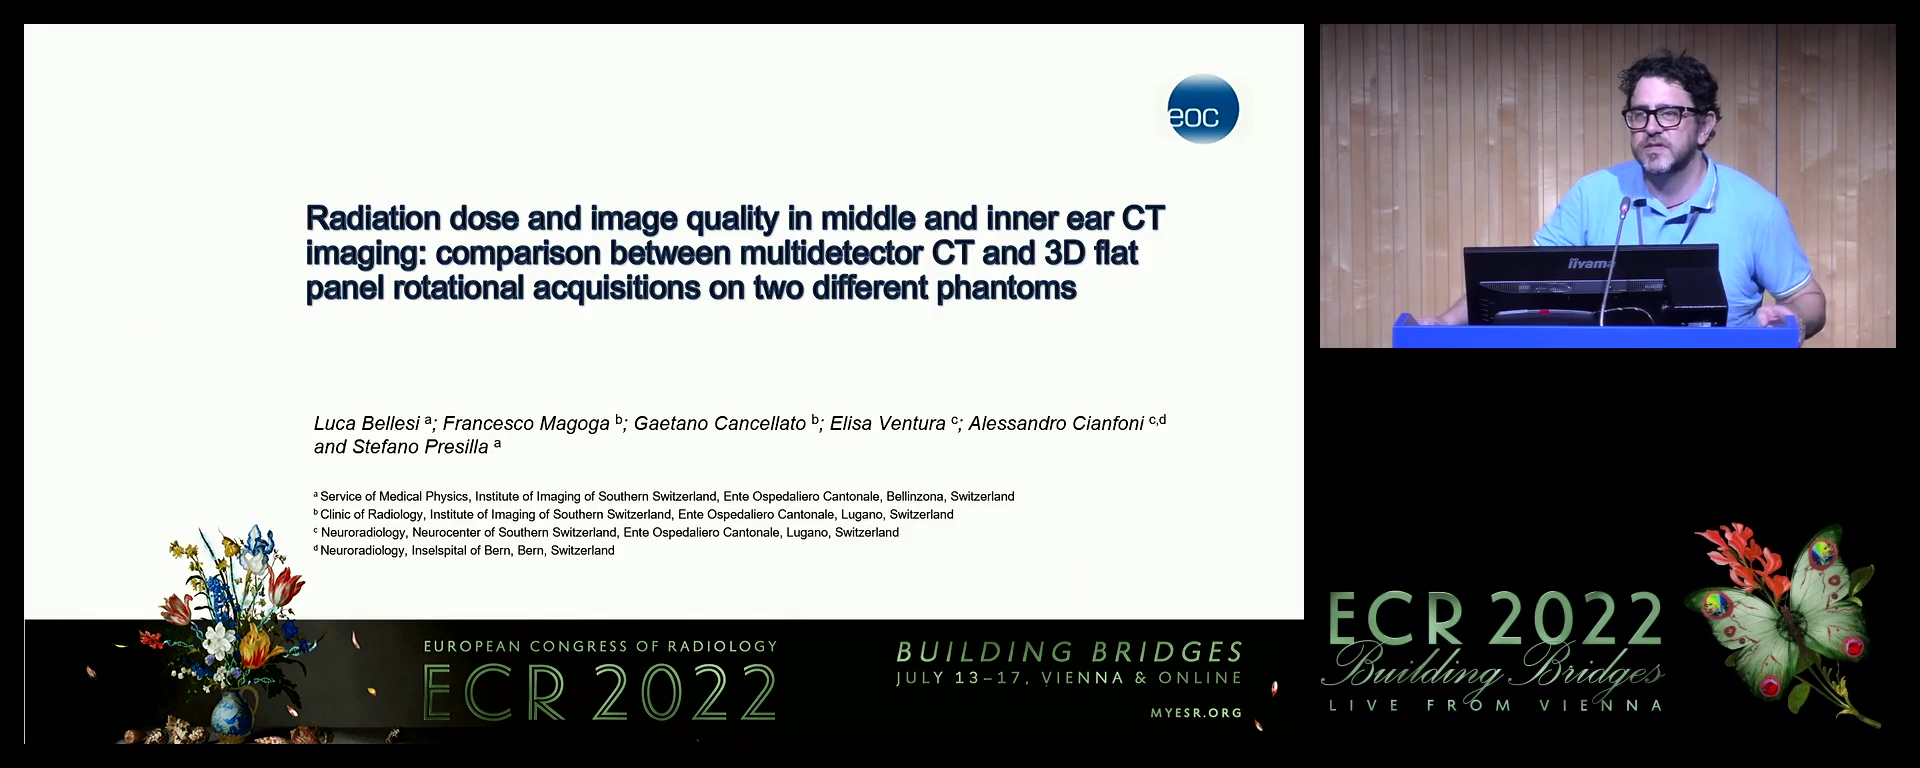 Radiation dose and image quality in middle and inner ear CT imaging: comparison between multidetector CT and 3D flat-panel rotational acquisitions on two different phantoms - Luca Bellesi, Bellinzona / CH